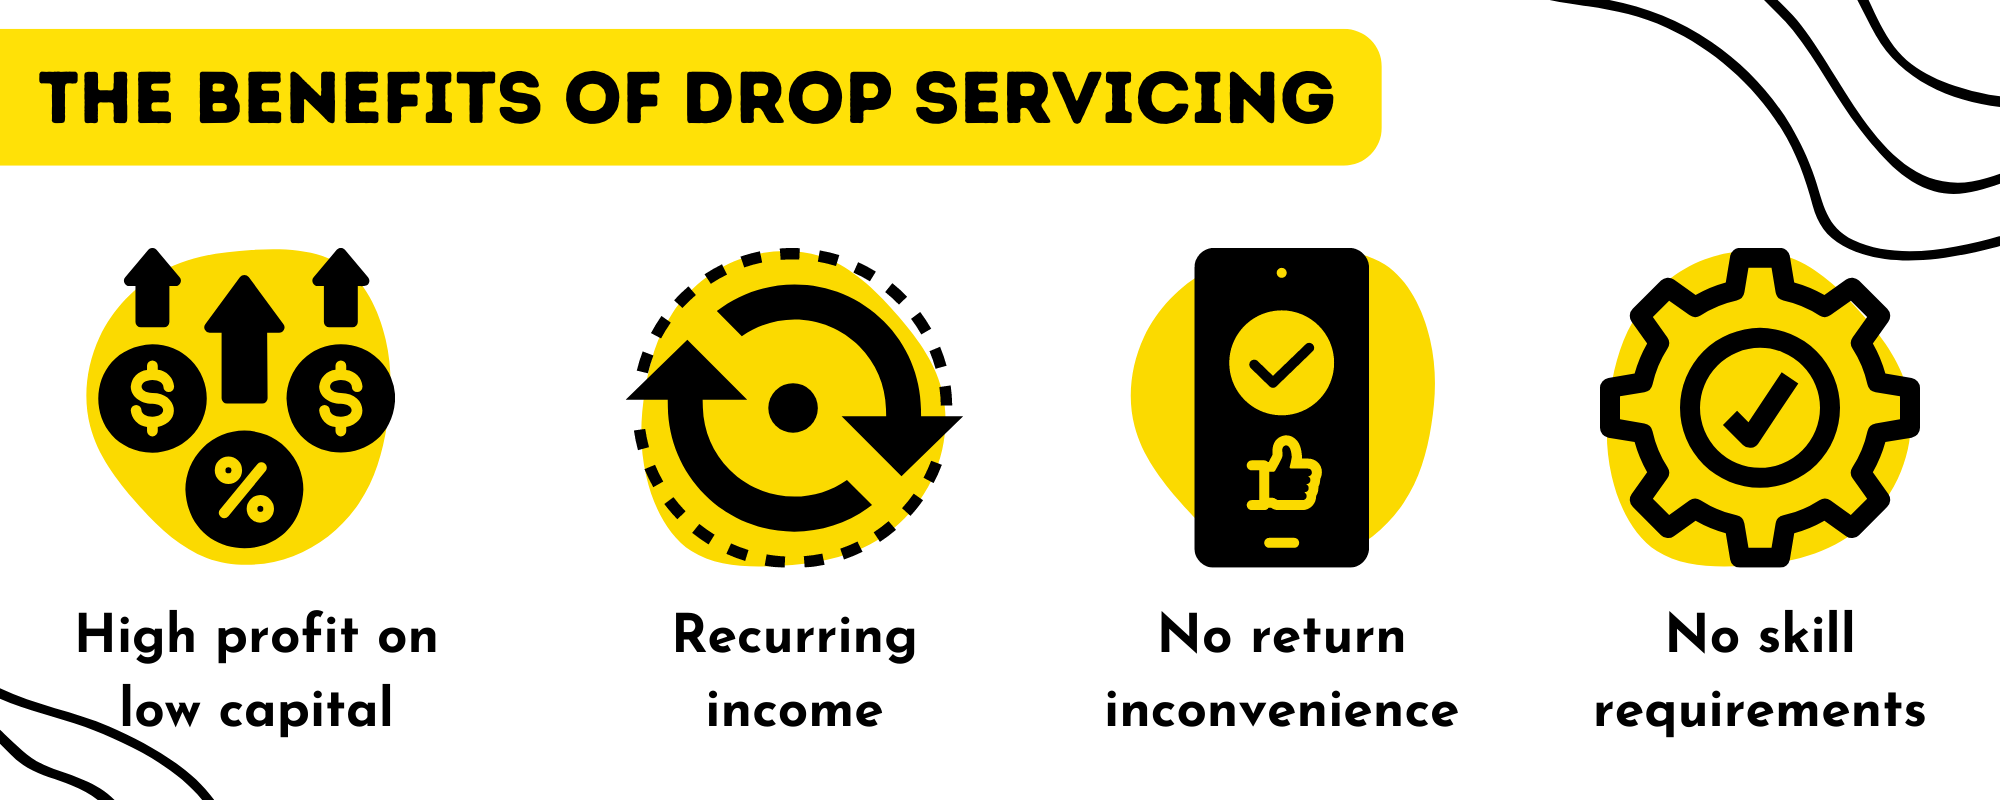 The benefits of drop servicing infograph